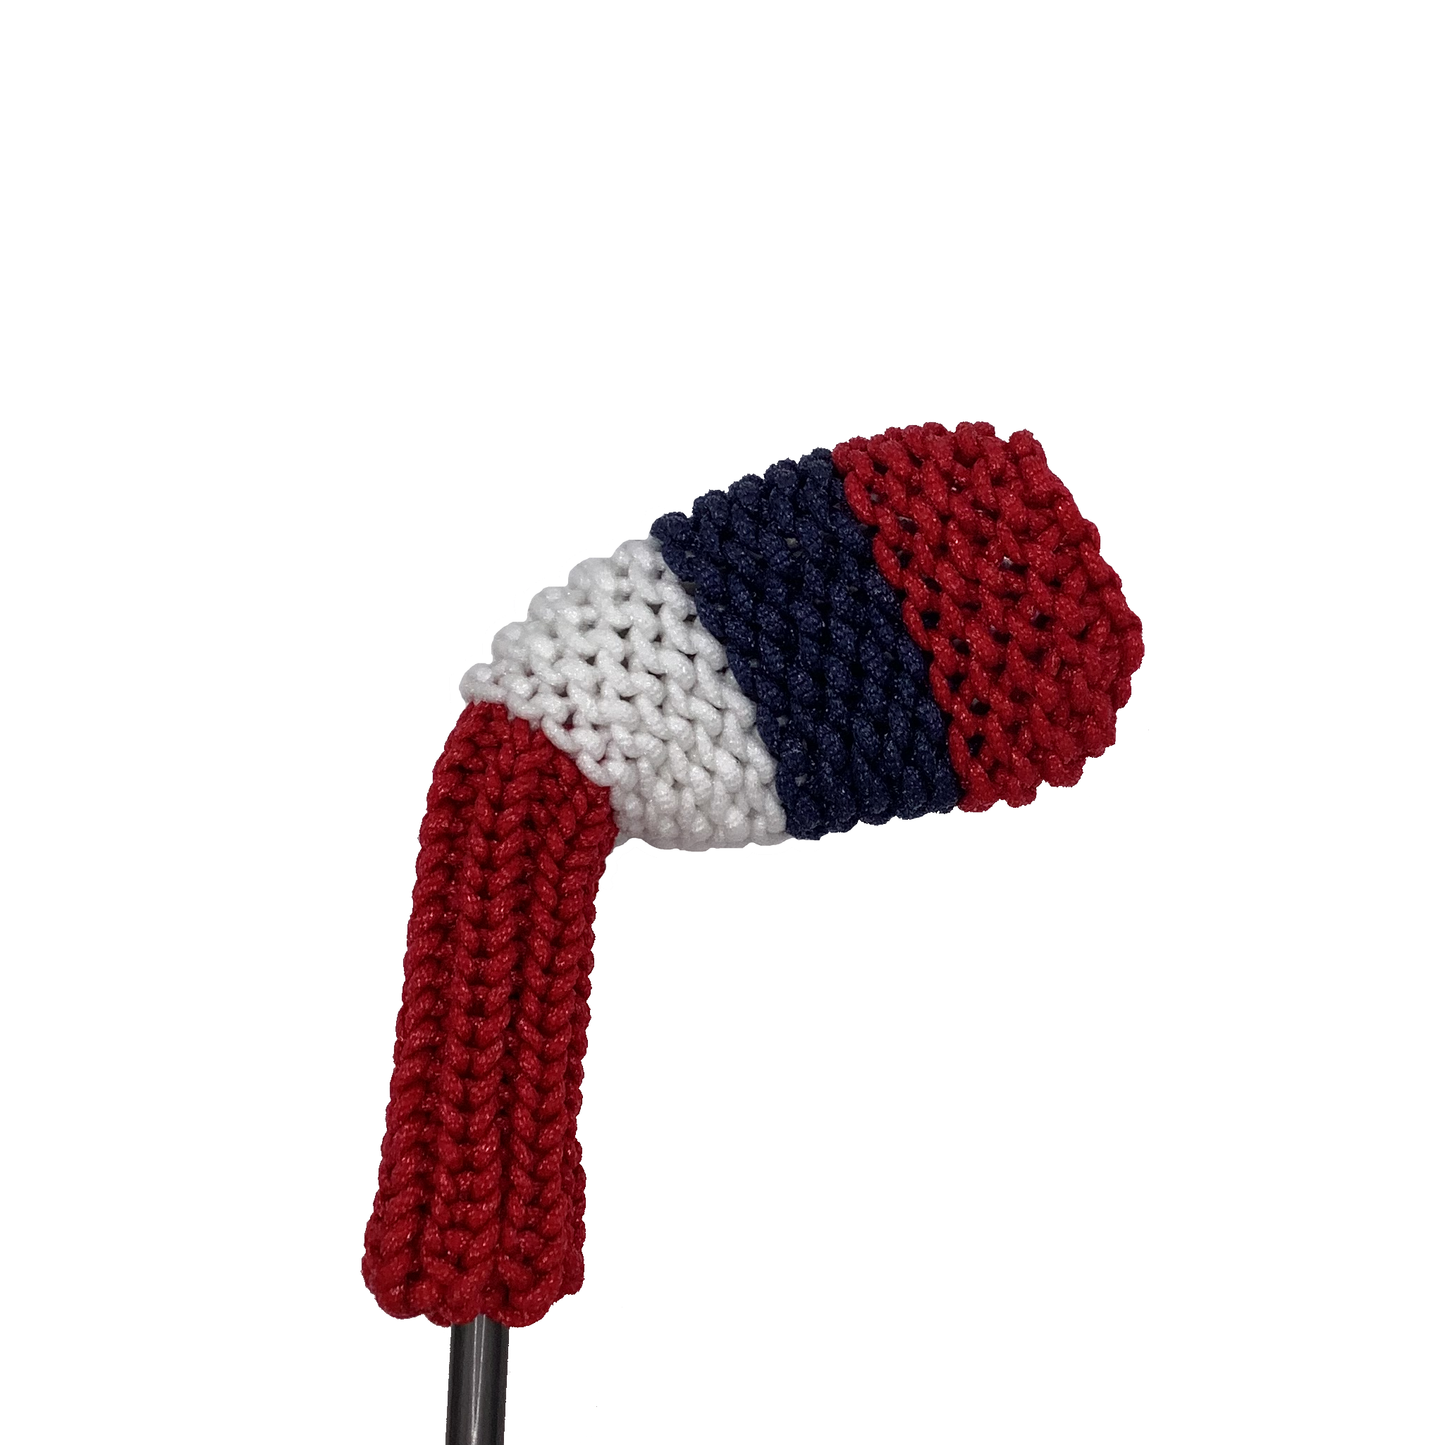 Clean Shot™ iron golf club headcover in red with white, navy blue and red block stripes. Perfect for a wedge or other iron.